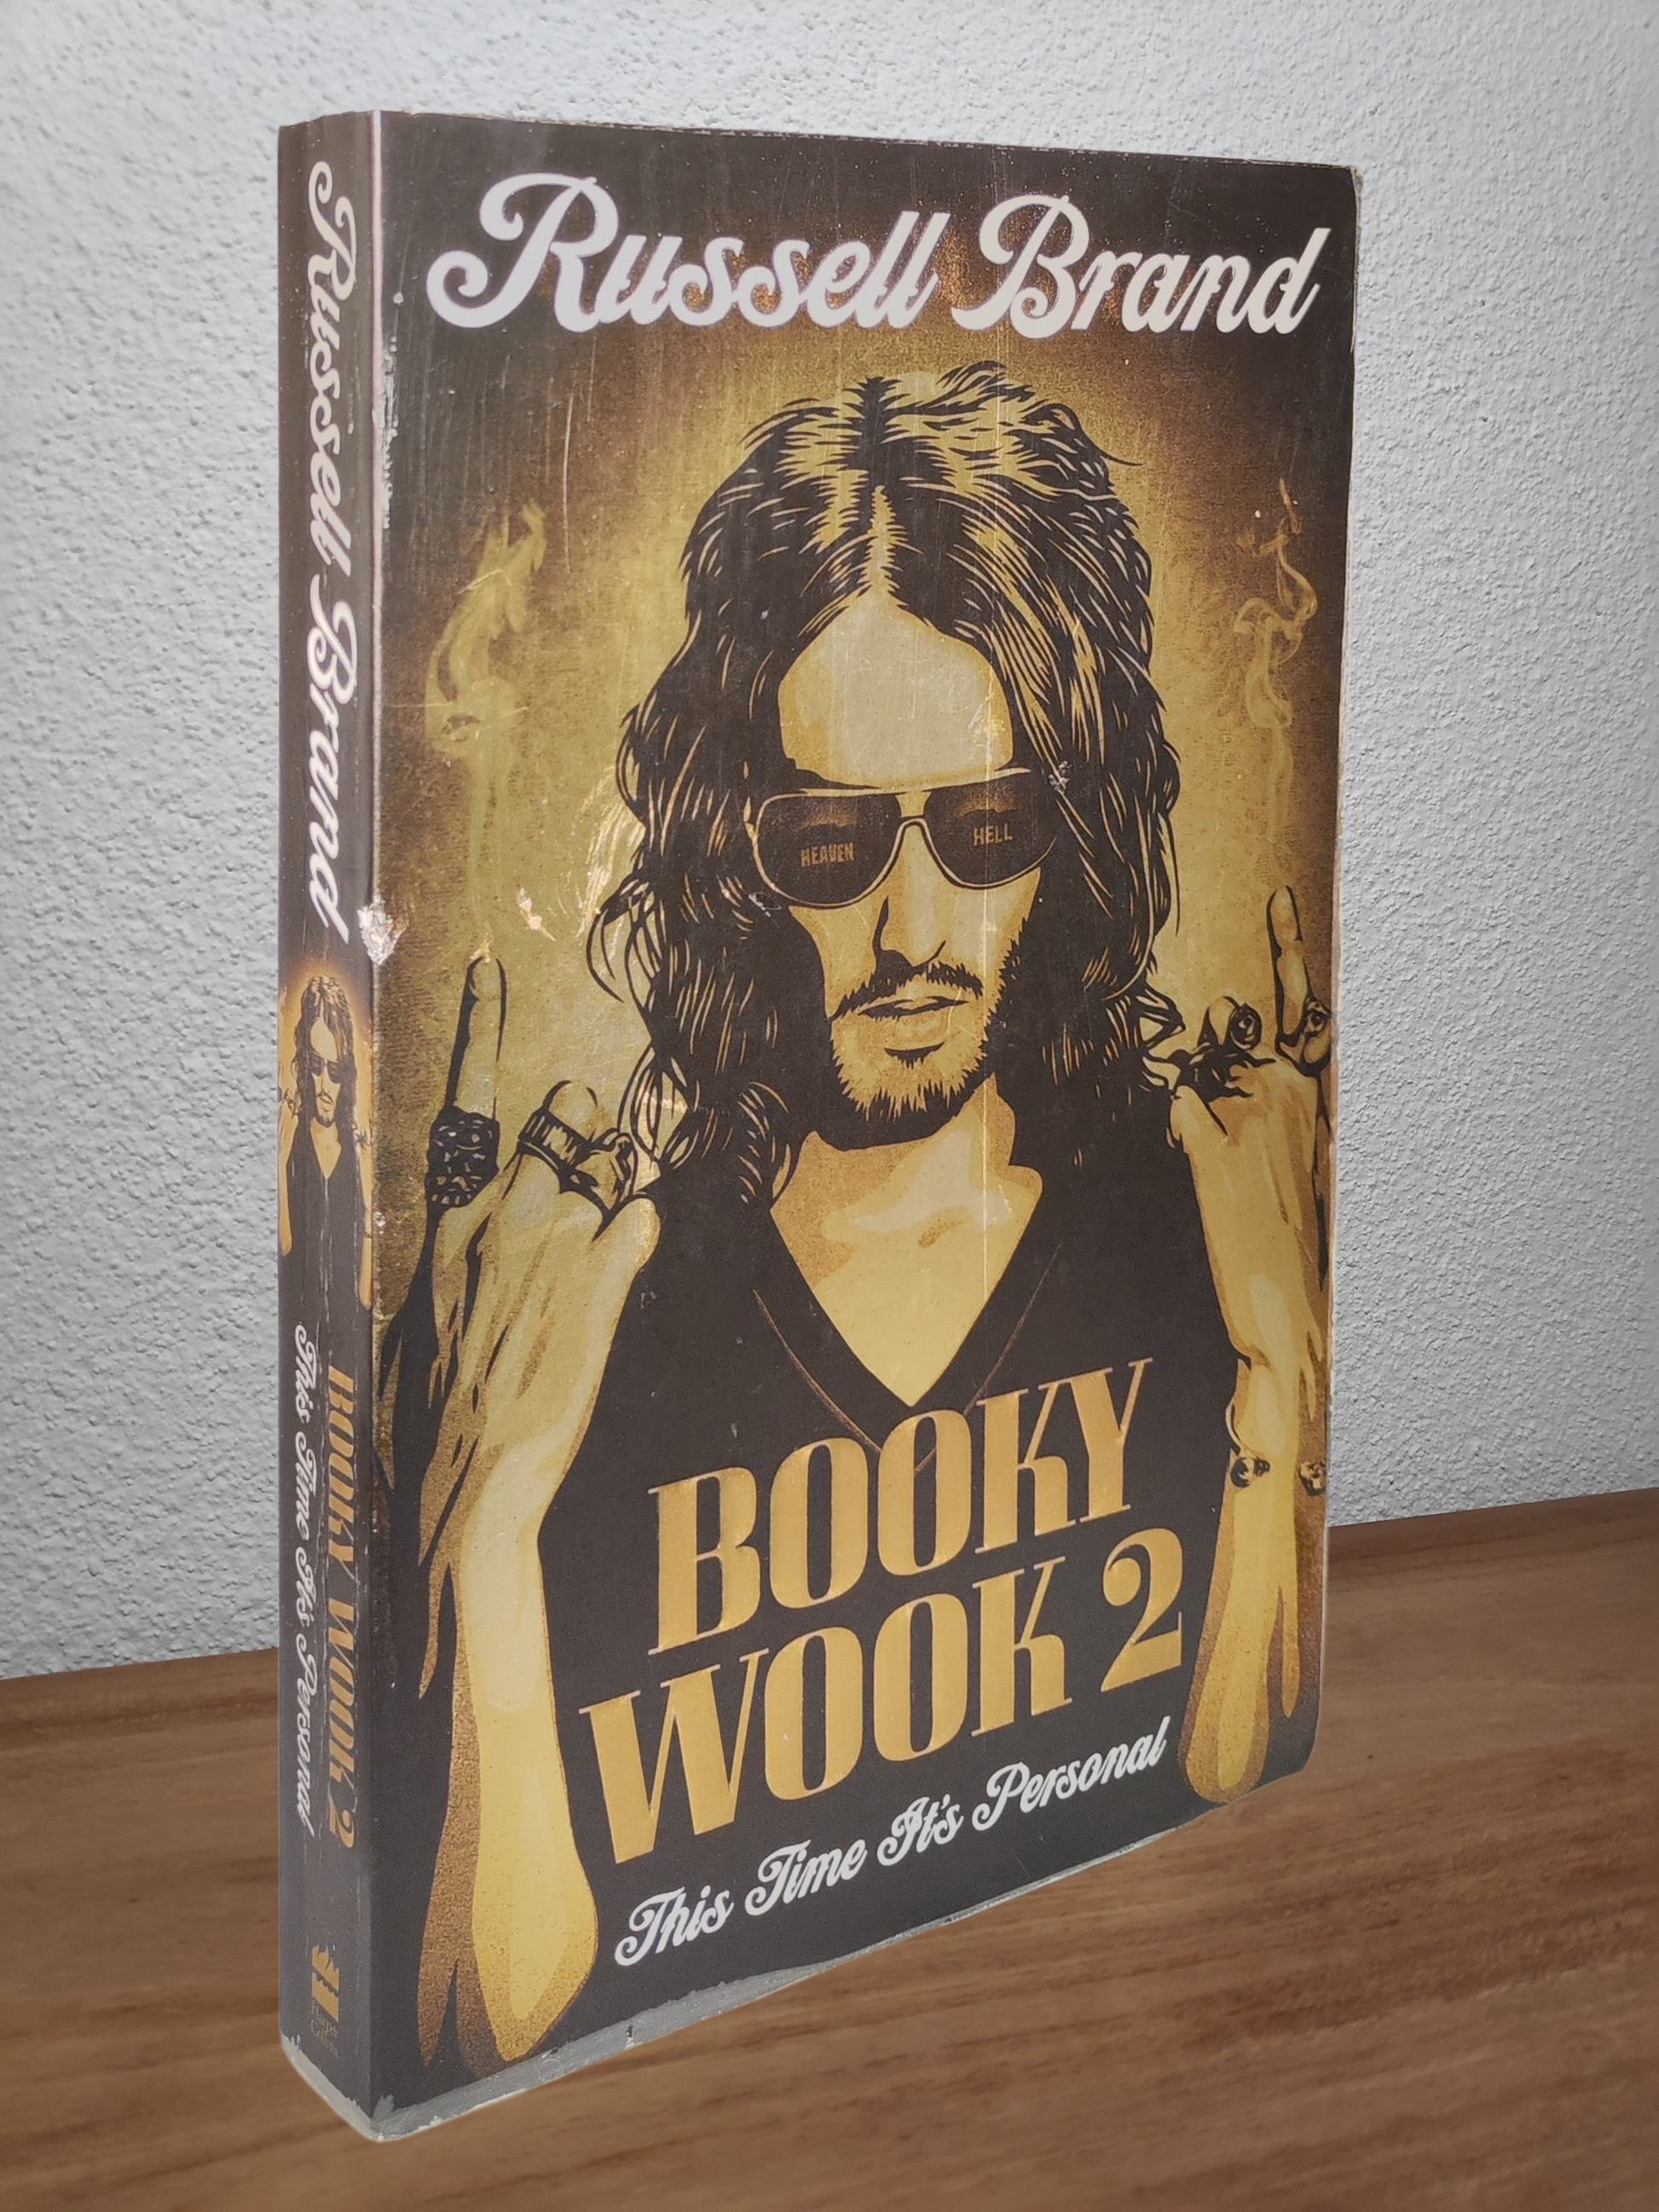 Russell Brand - Booky Wook 2 - Second-hand english book to deliver in Zurich & Switzerland